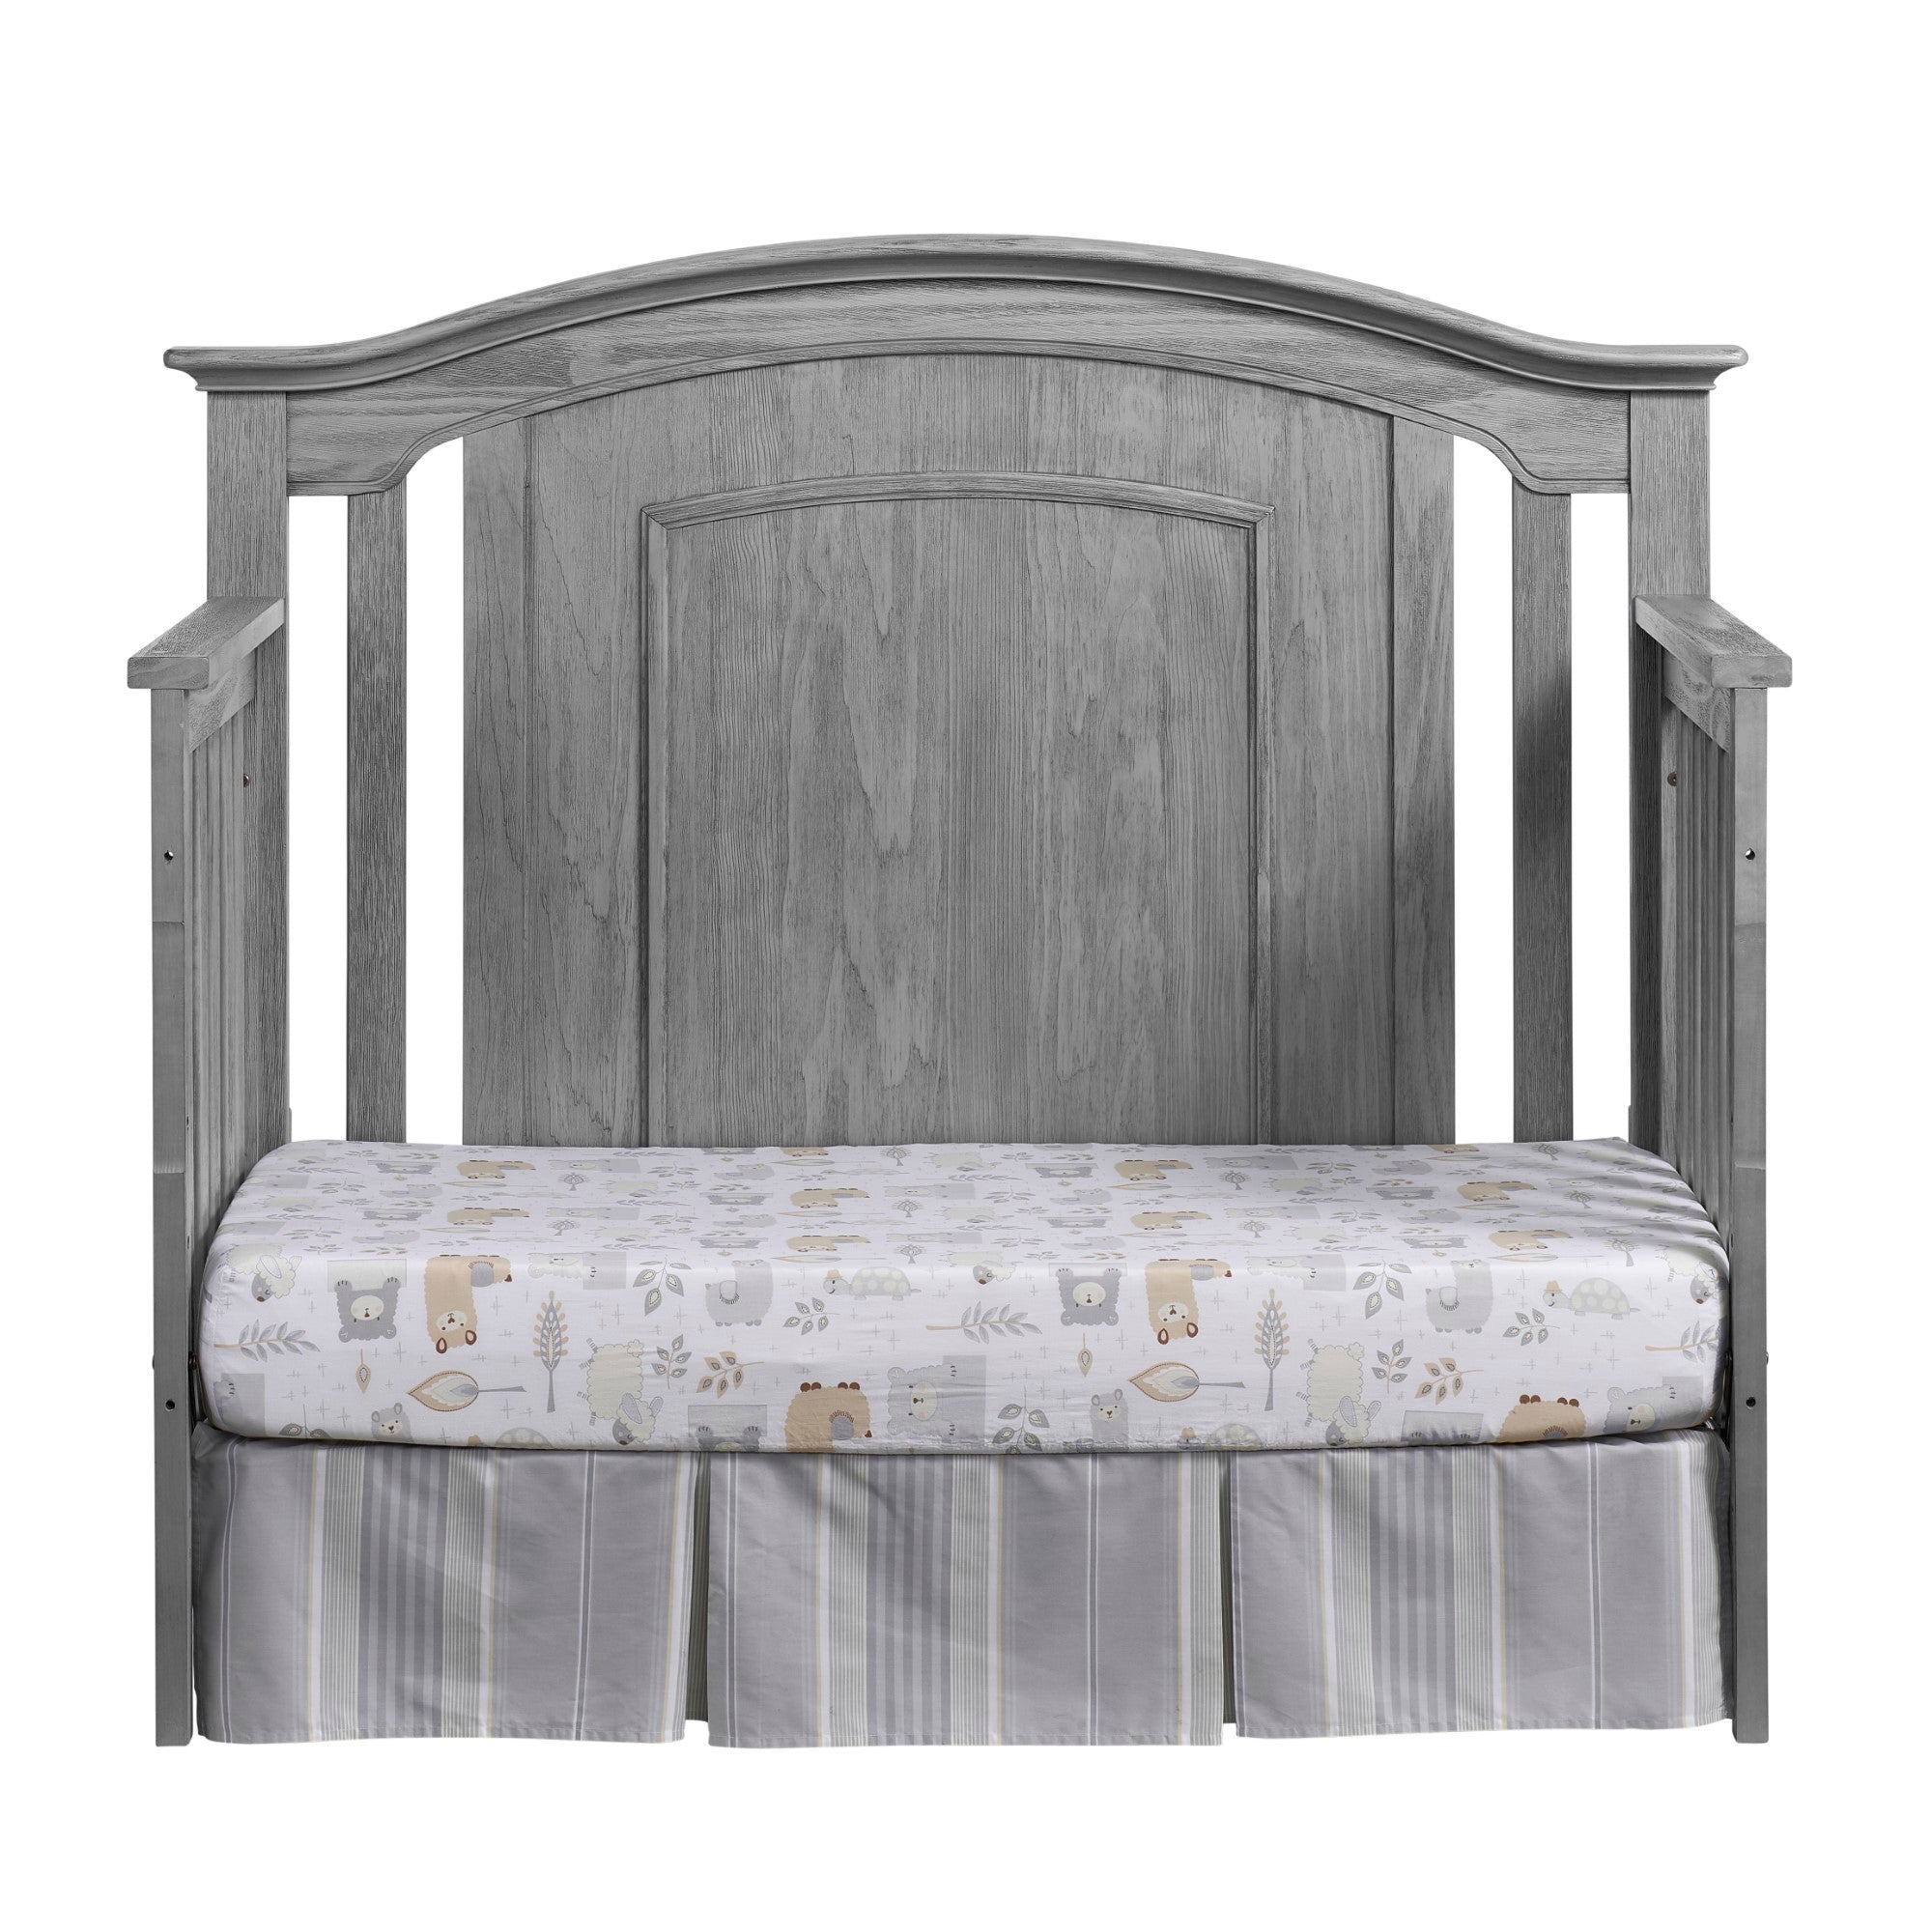 Oxford Baby Willowbrook 4 in 1 Convertible Crib